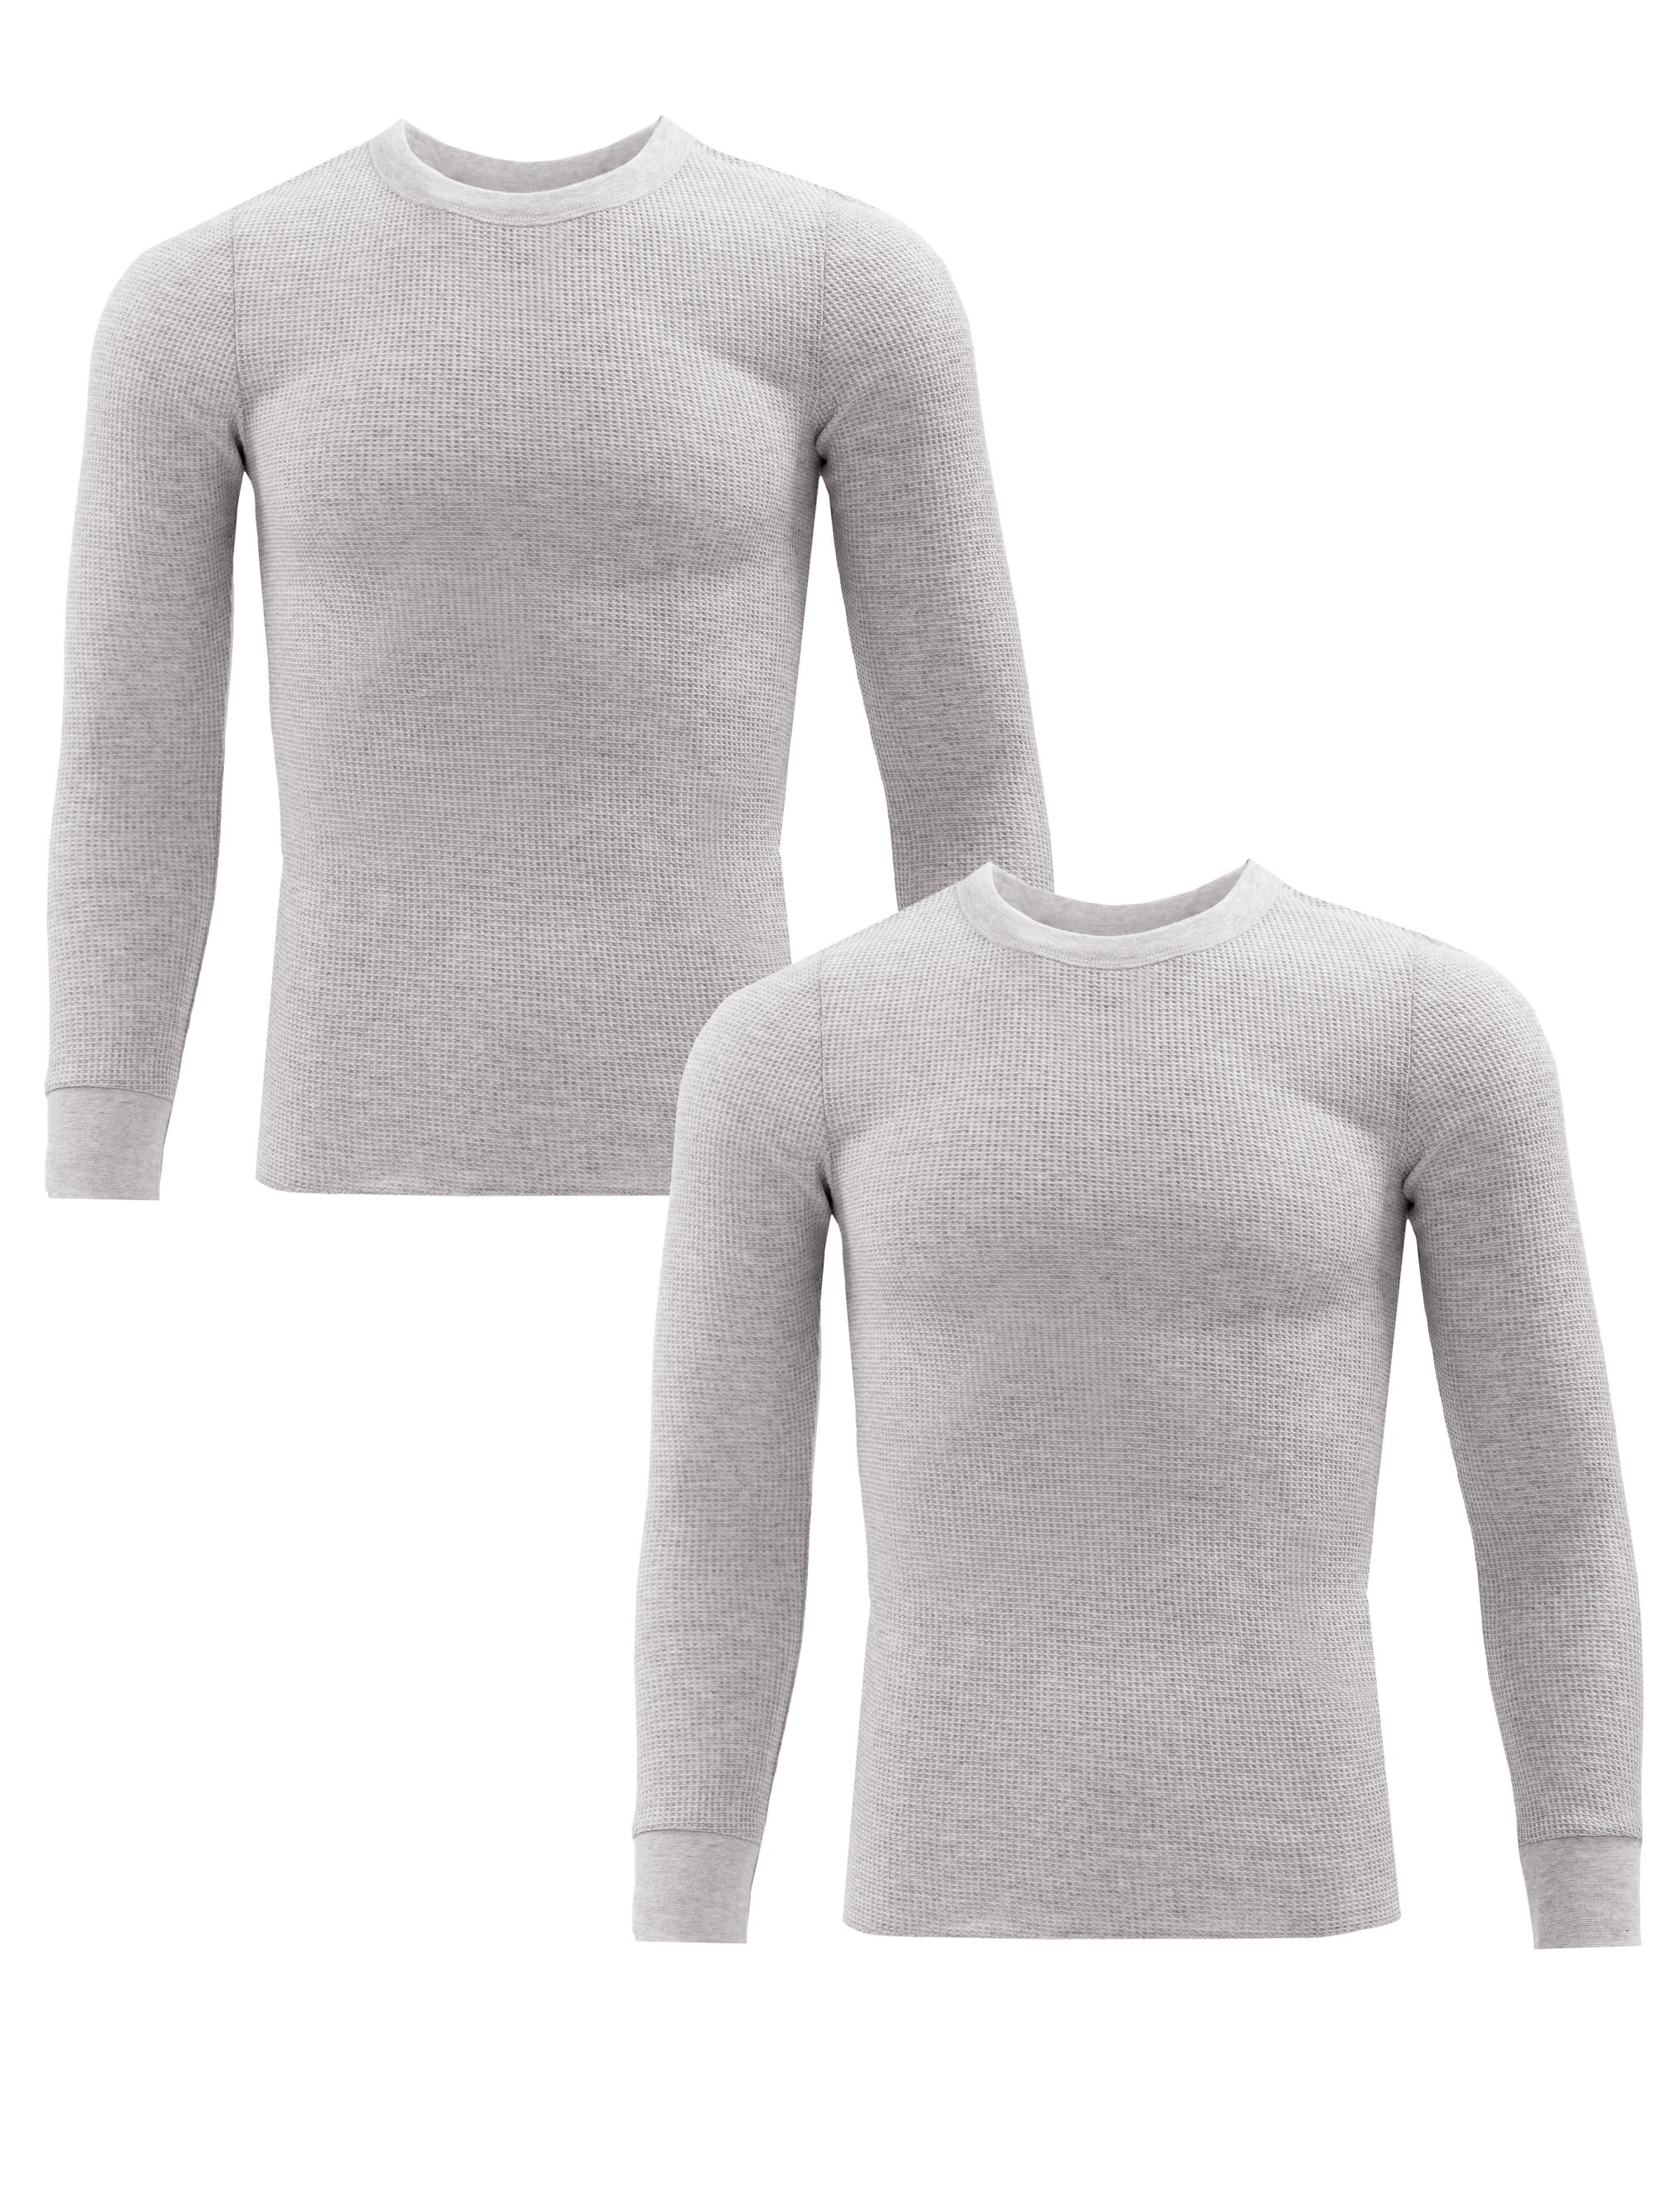 Fruit of the Loom Men's Thermal Waffle Crew Top, 2-Pack, Sizes S-5XL